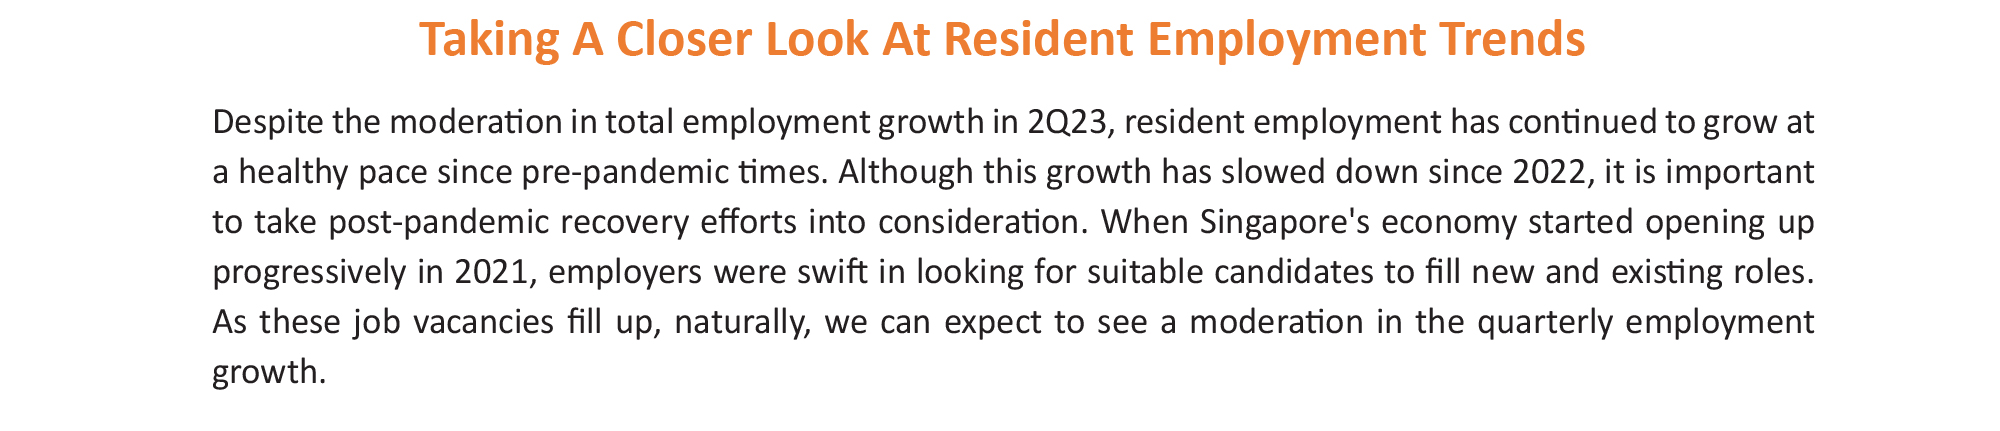 Taking A Closer Look At Resident Employment Trends